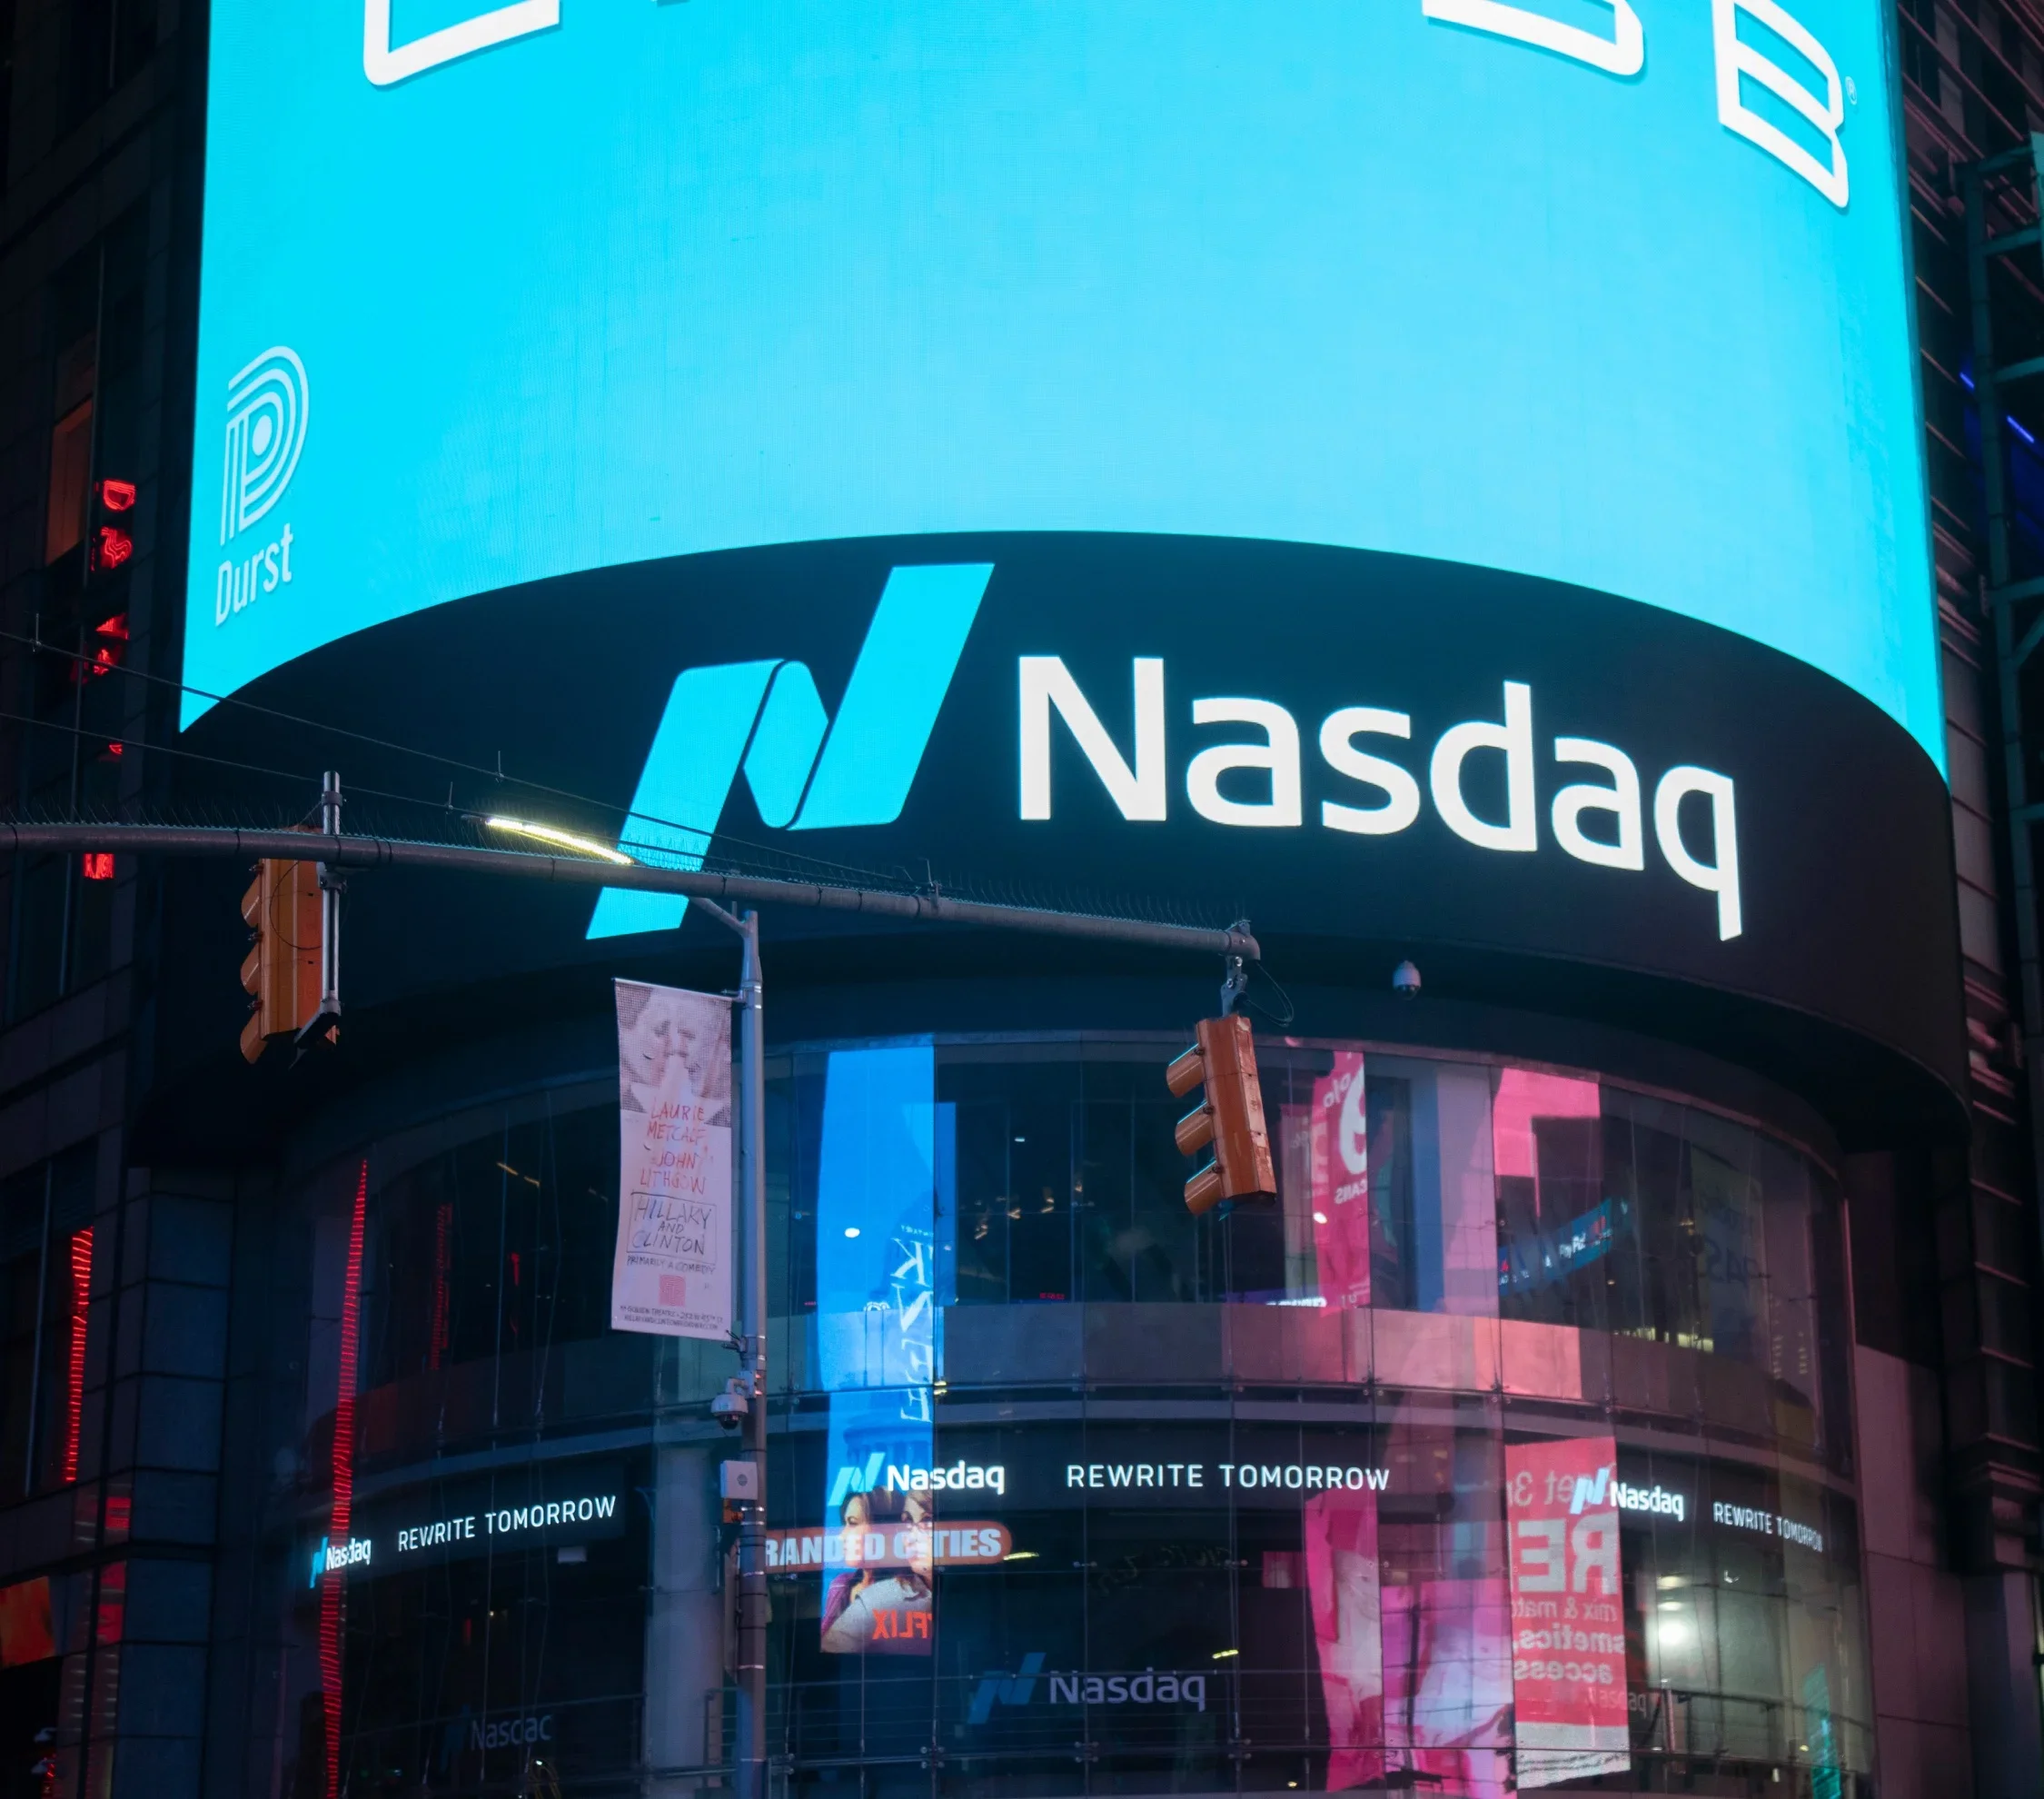 What is the Nasdaq?